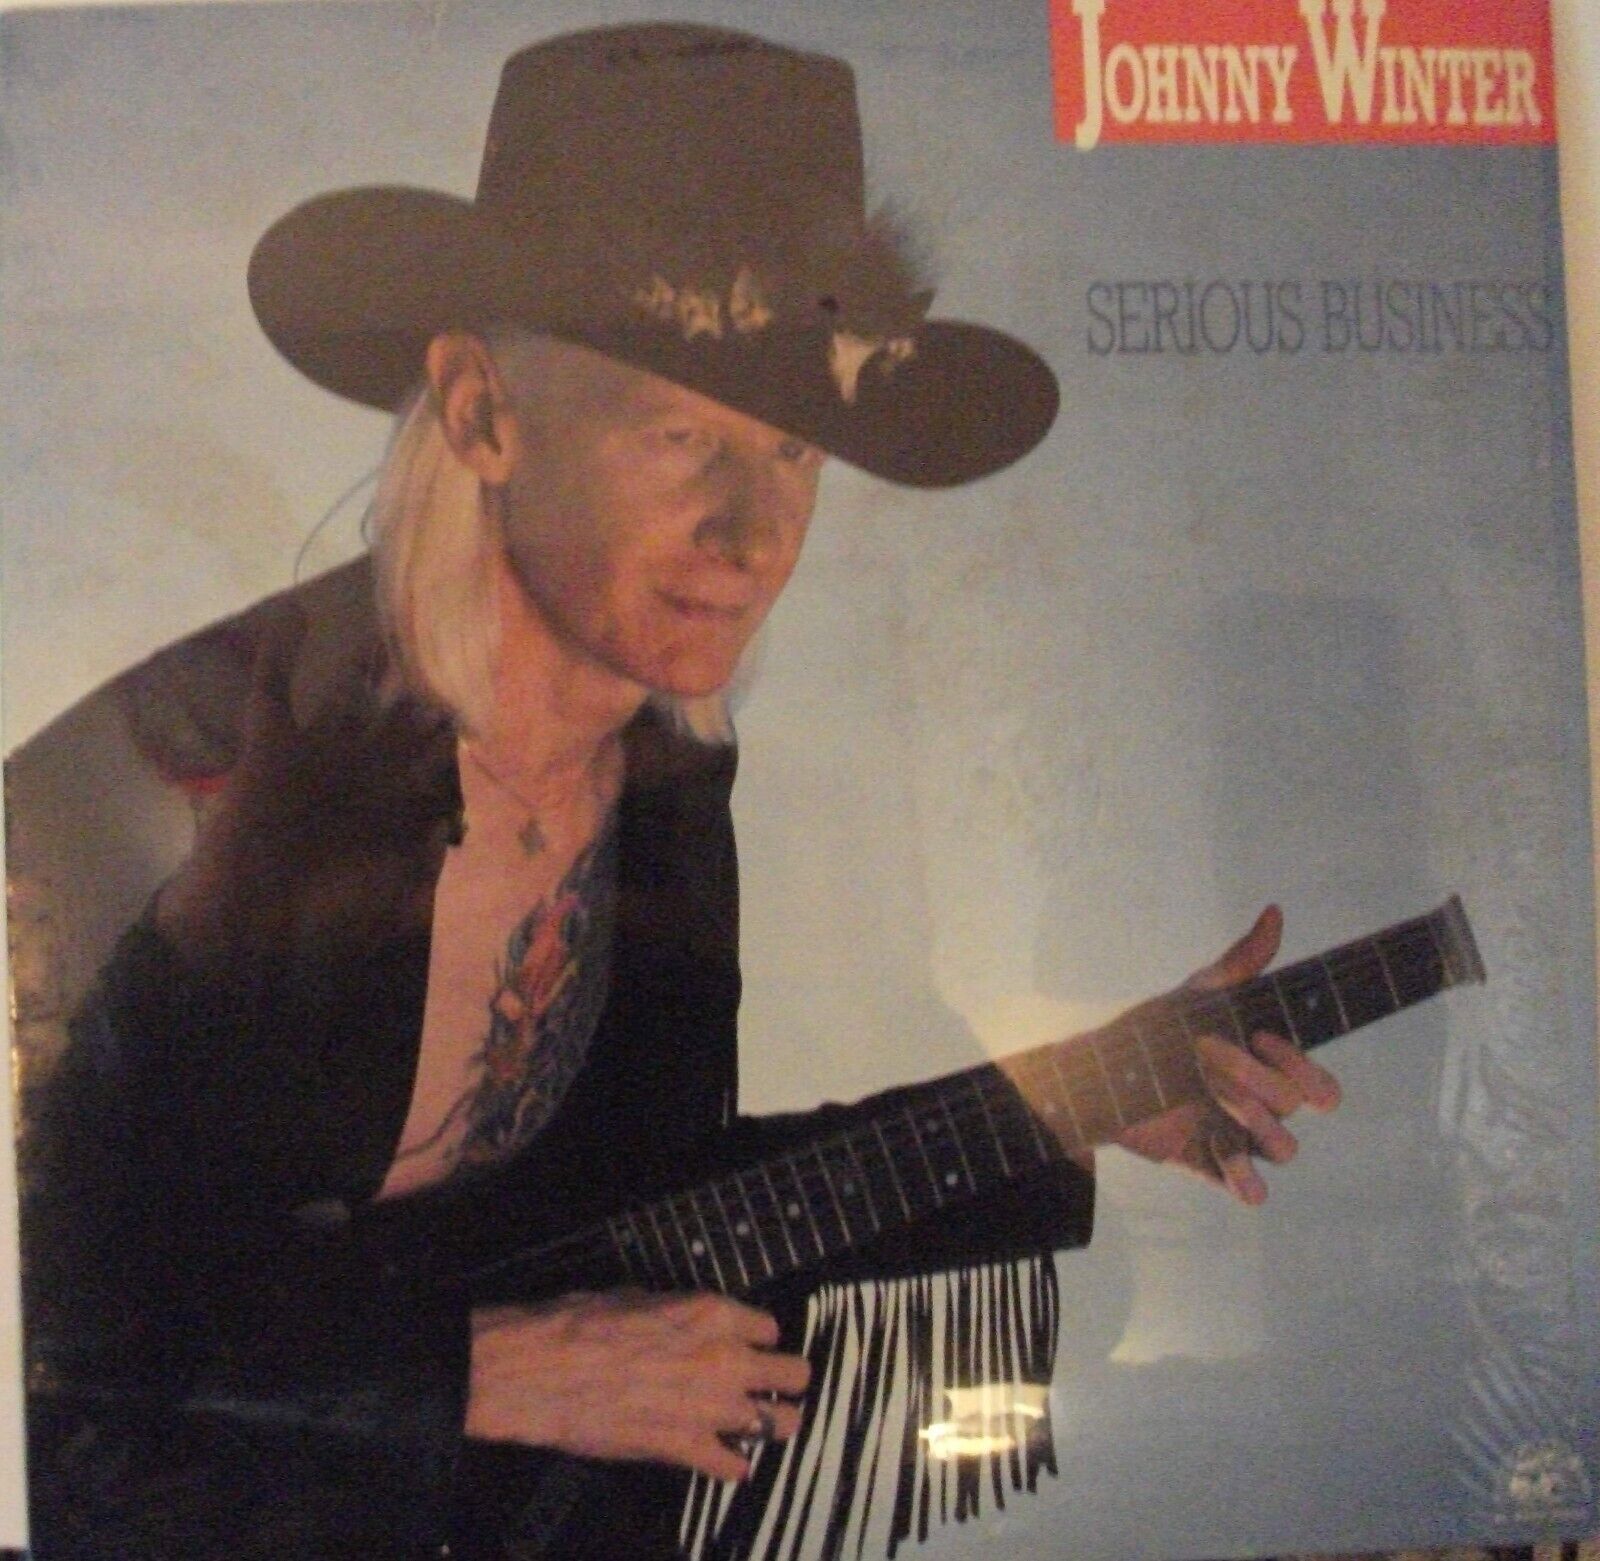 Johnny Winter - Serious Business  #AL4742  VG+ - FREE SHIPPING